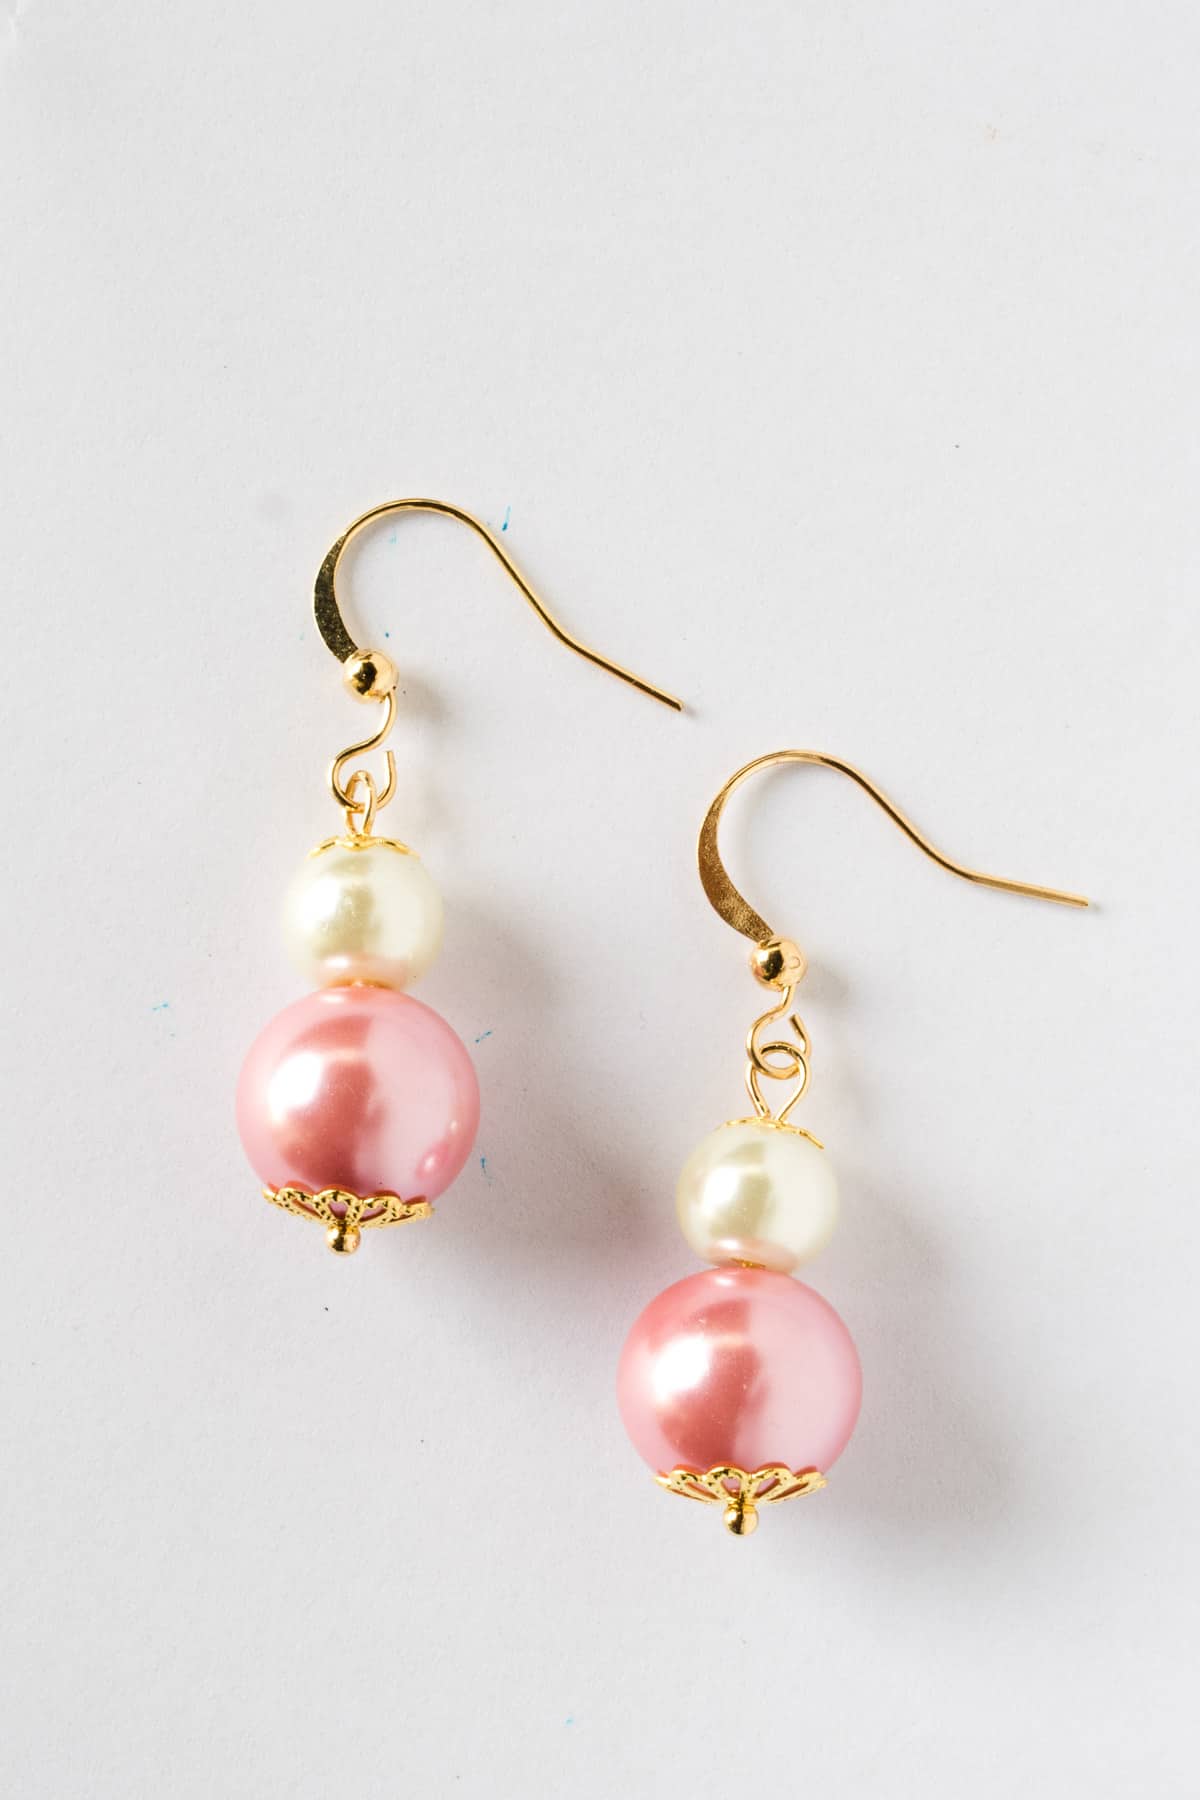 Earring making for beginners - A pair of white and pink earrings.